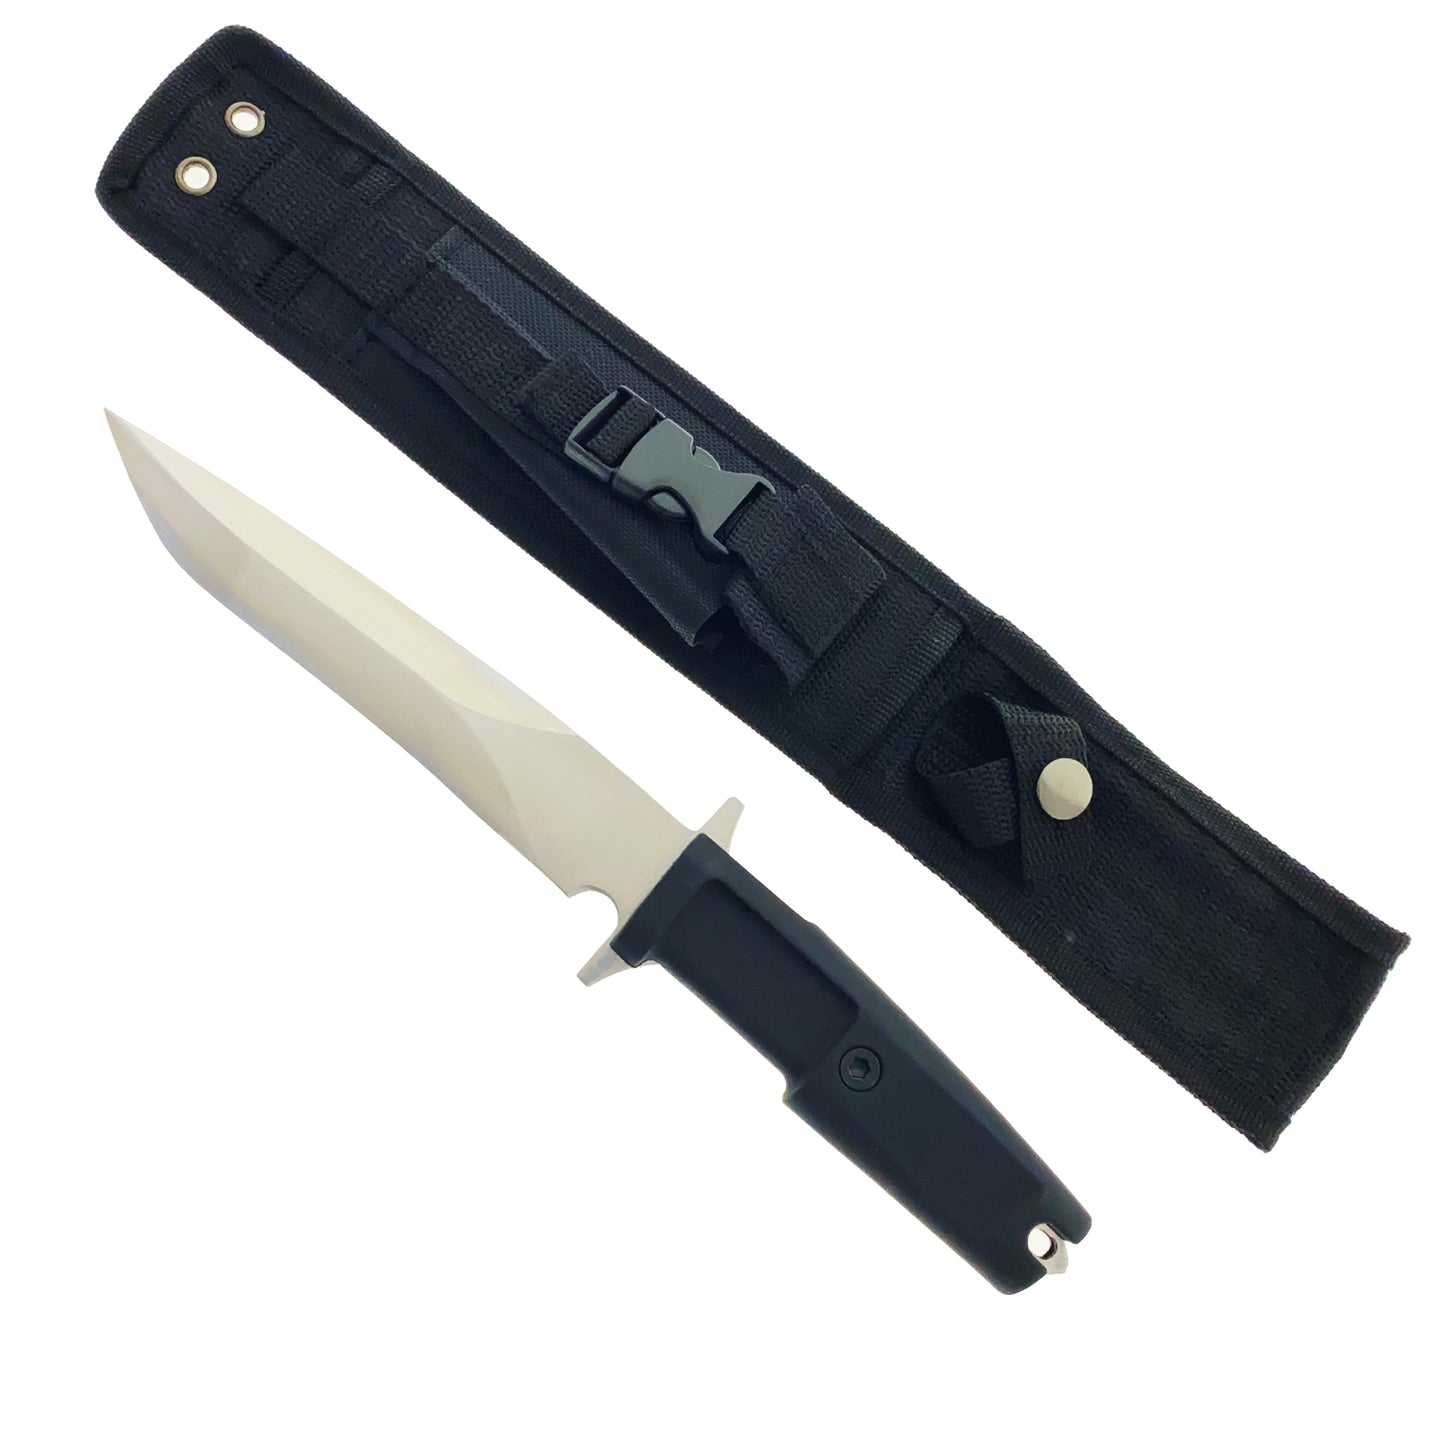 Falcon 12" Tactical Knife with black handle